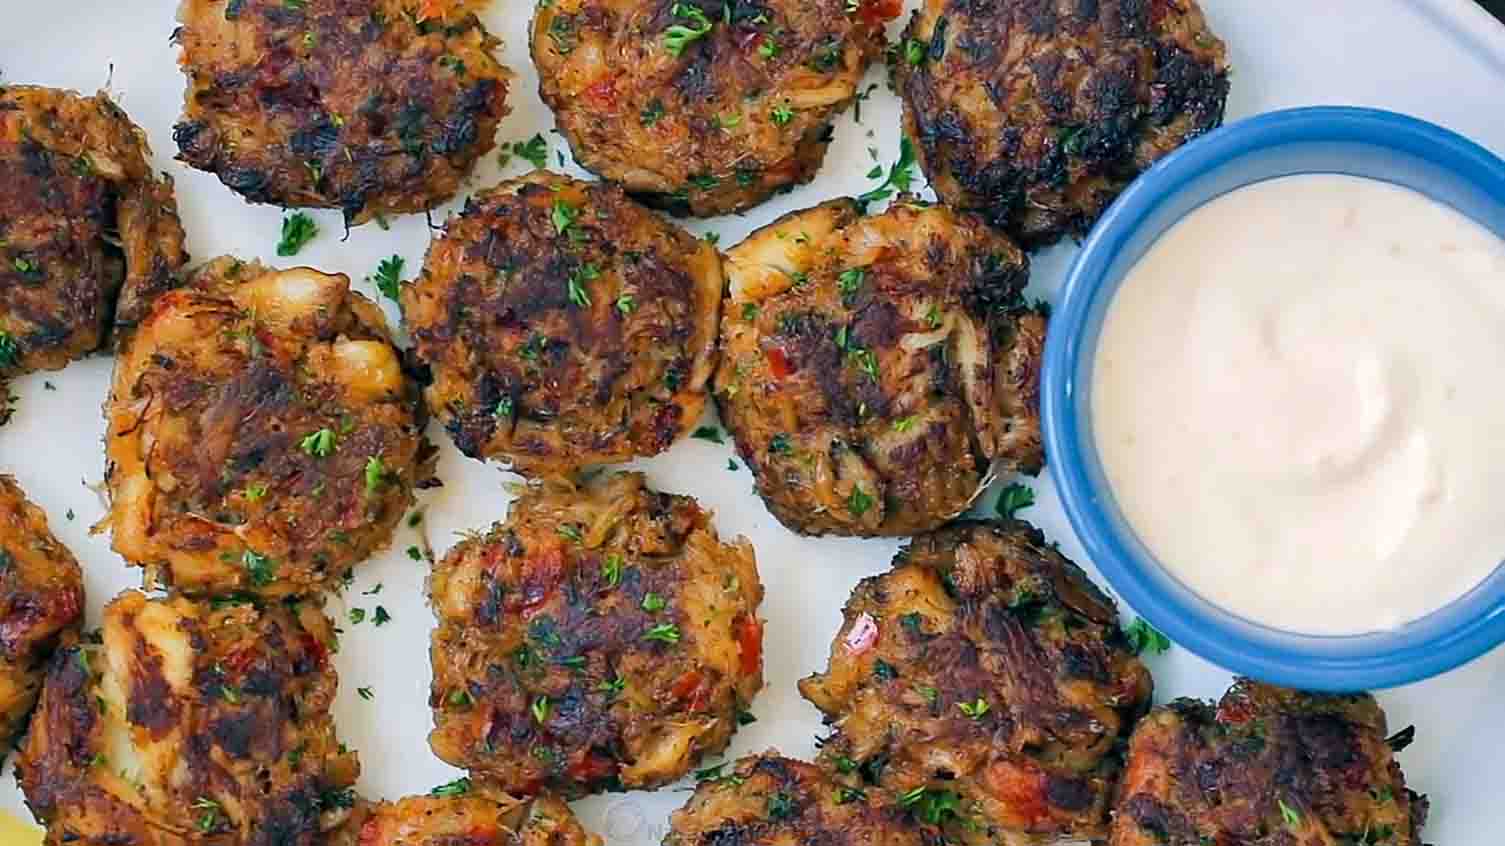 Best of Baltimore: See who makes the best crab cakes